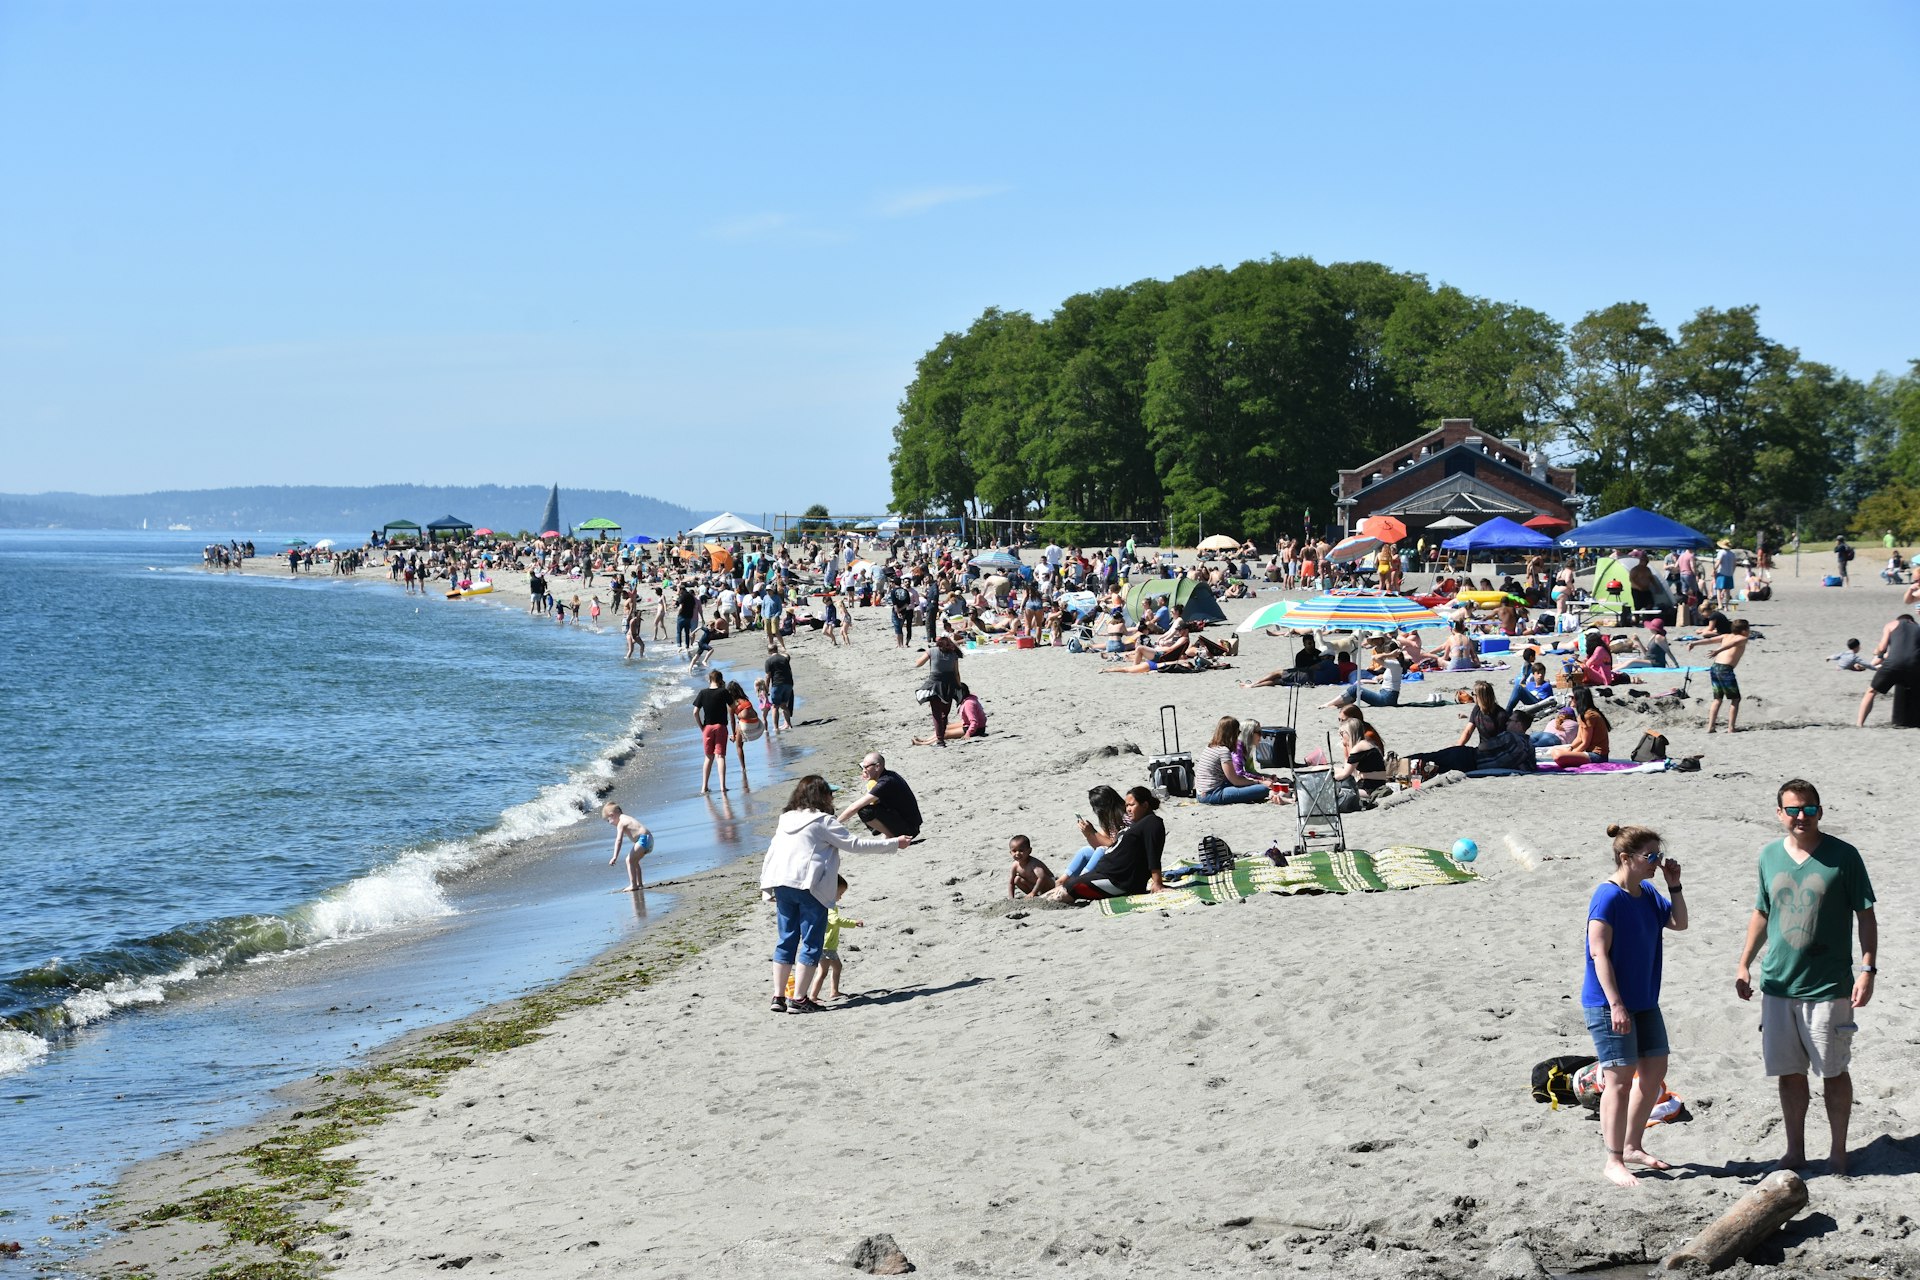 Many people on the beach at Golden Gardens Park, Seattle